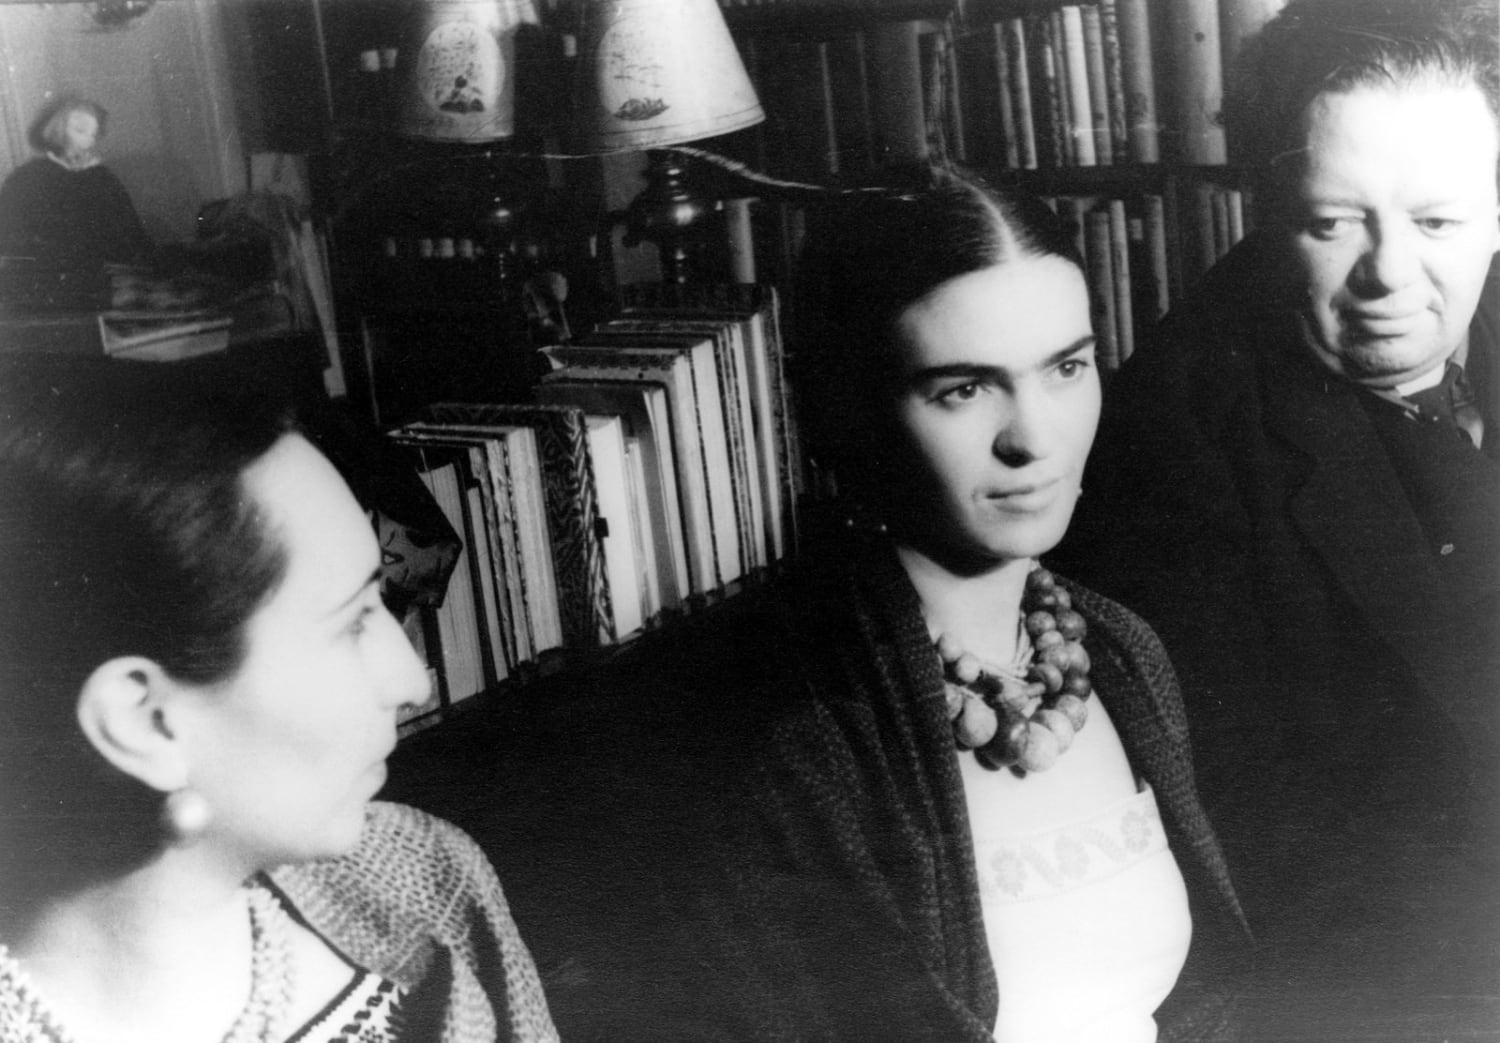 This May Be the Only Known Recording of Frida Kahlo’s Voice